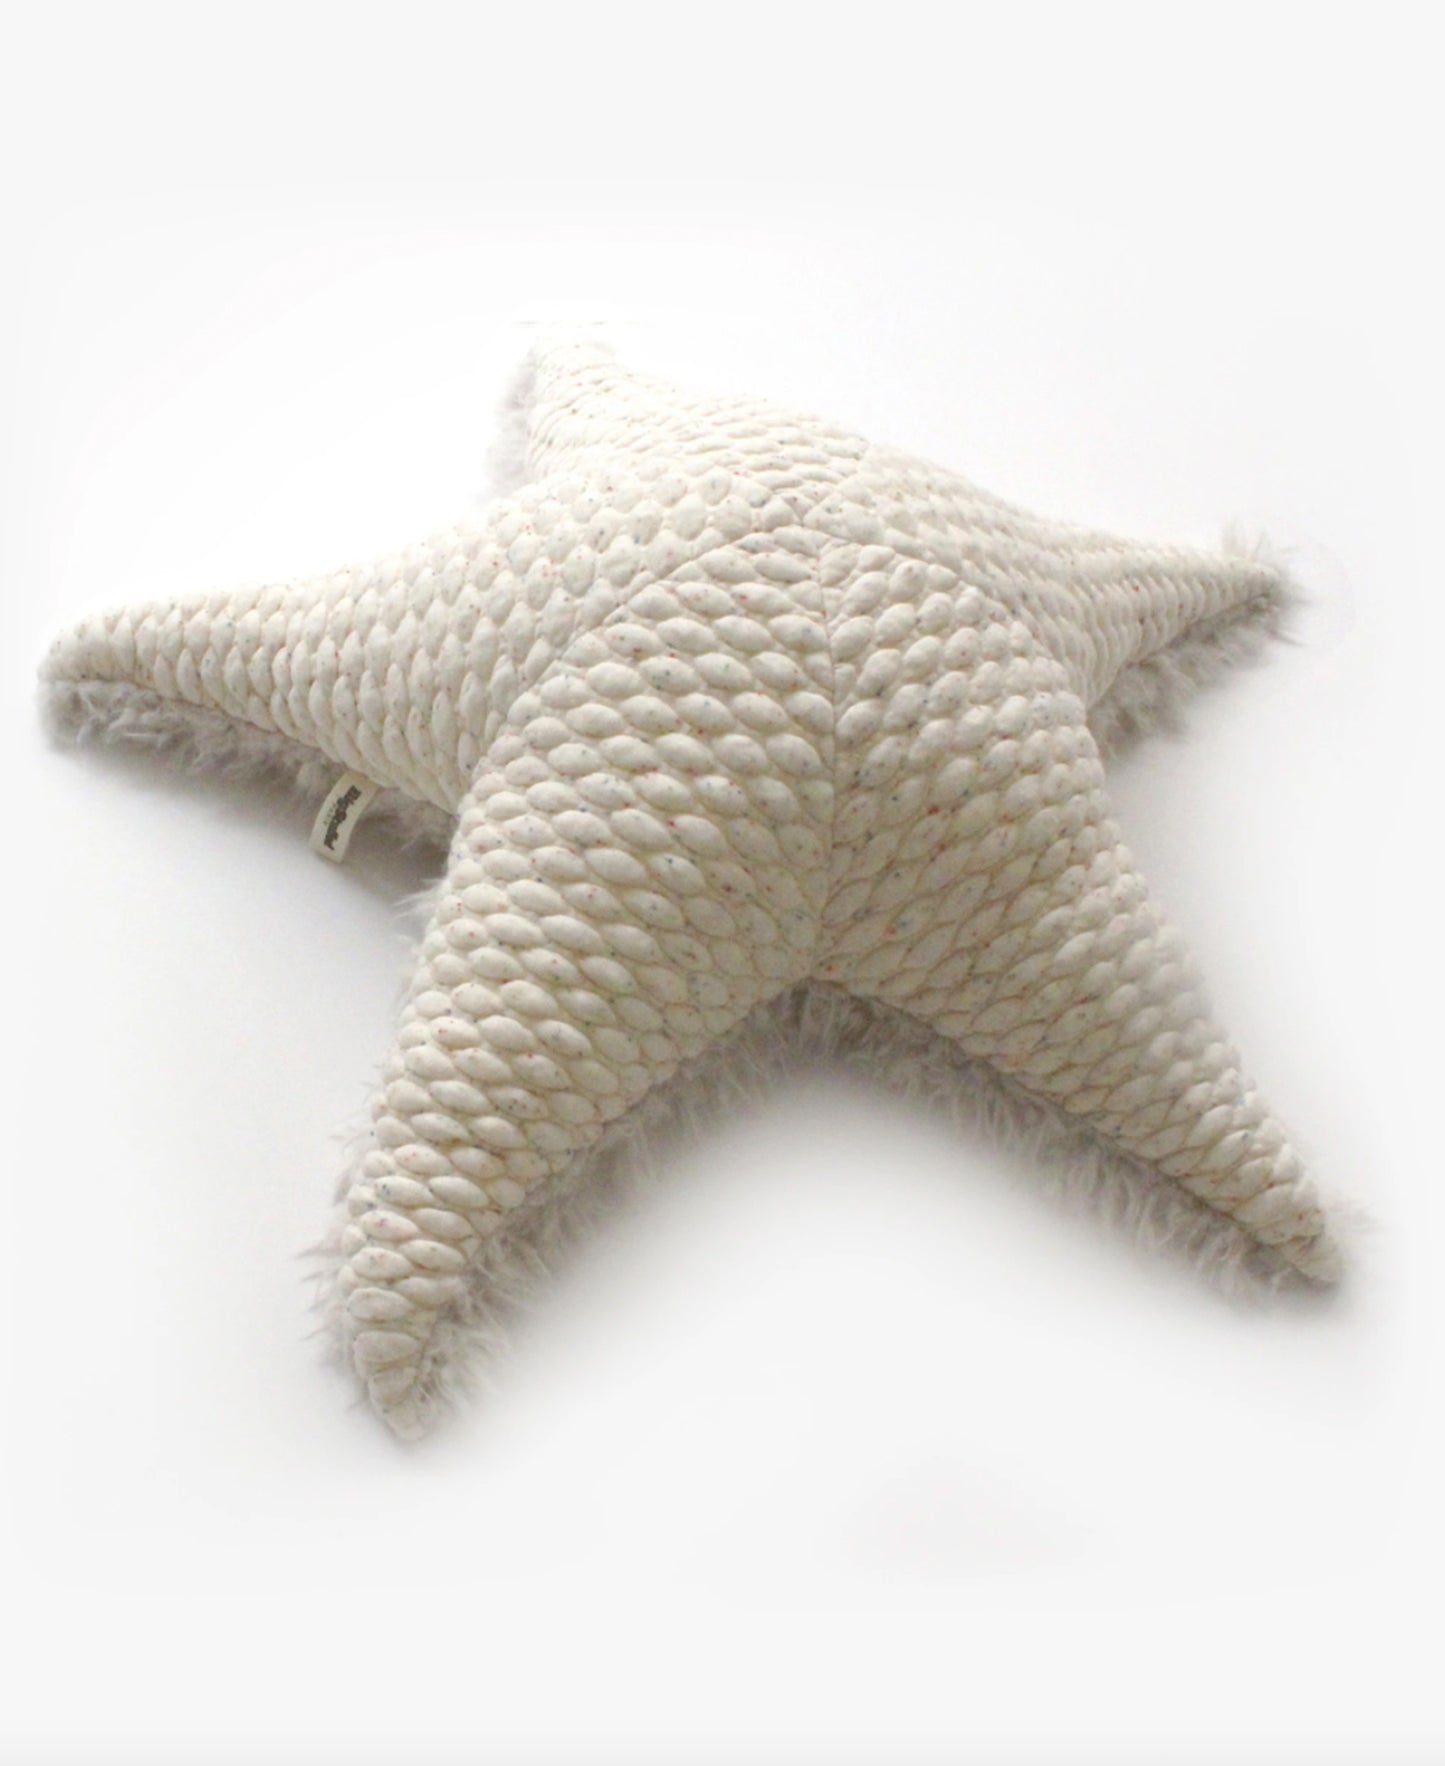 An off-white starfish stuffed animal, shown from above.